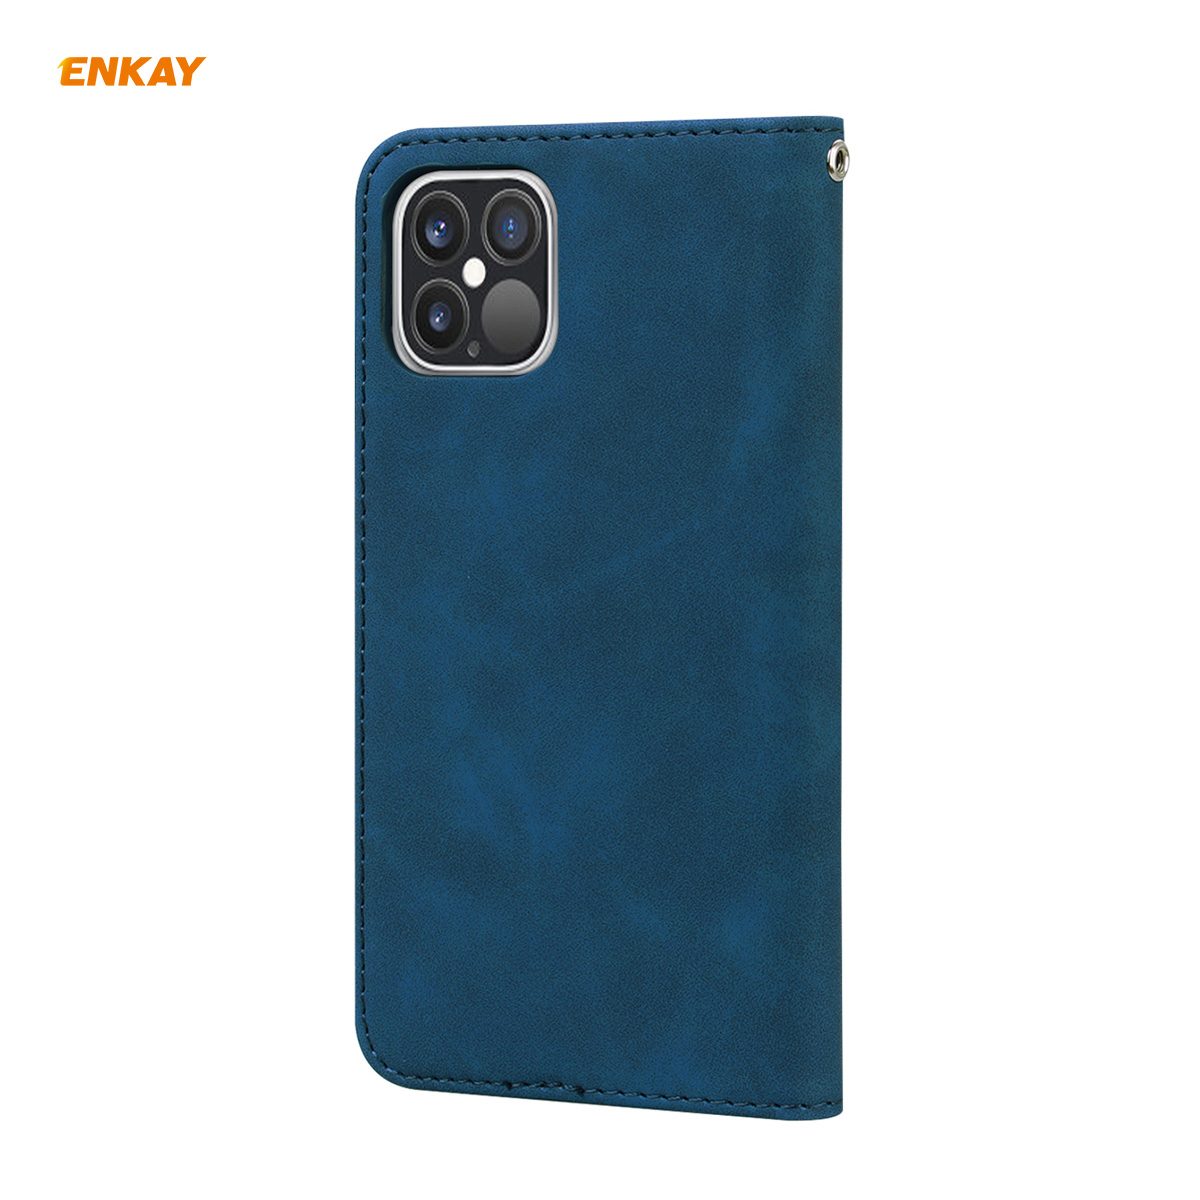 Enkay-for-iPhone-12-Pro-Max-Case-Business-Magnetic-Flip-with-Card-Slot-Stand-PU-Leather--TPU-Full-Co-1755830-12